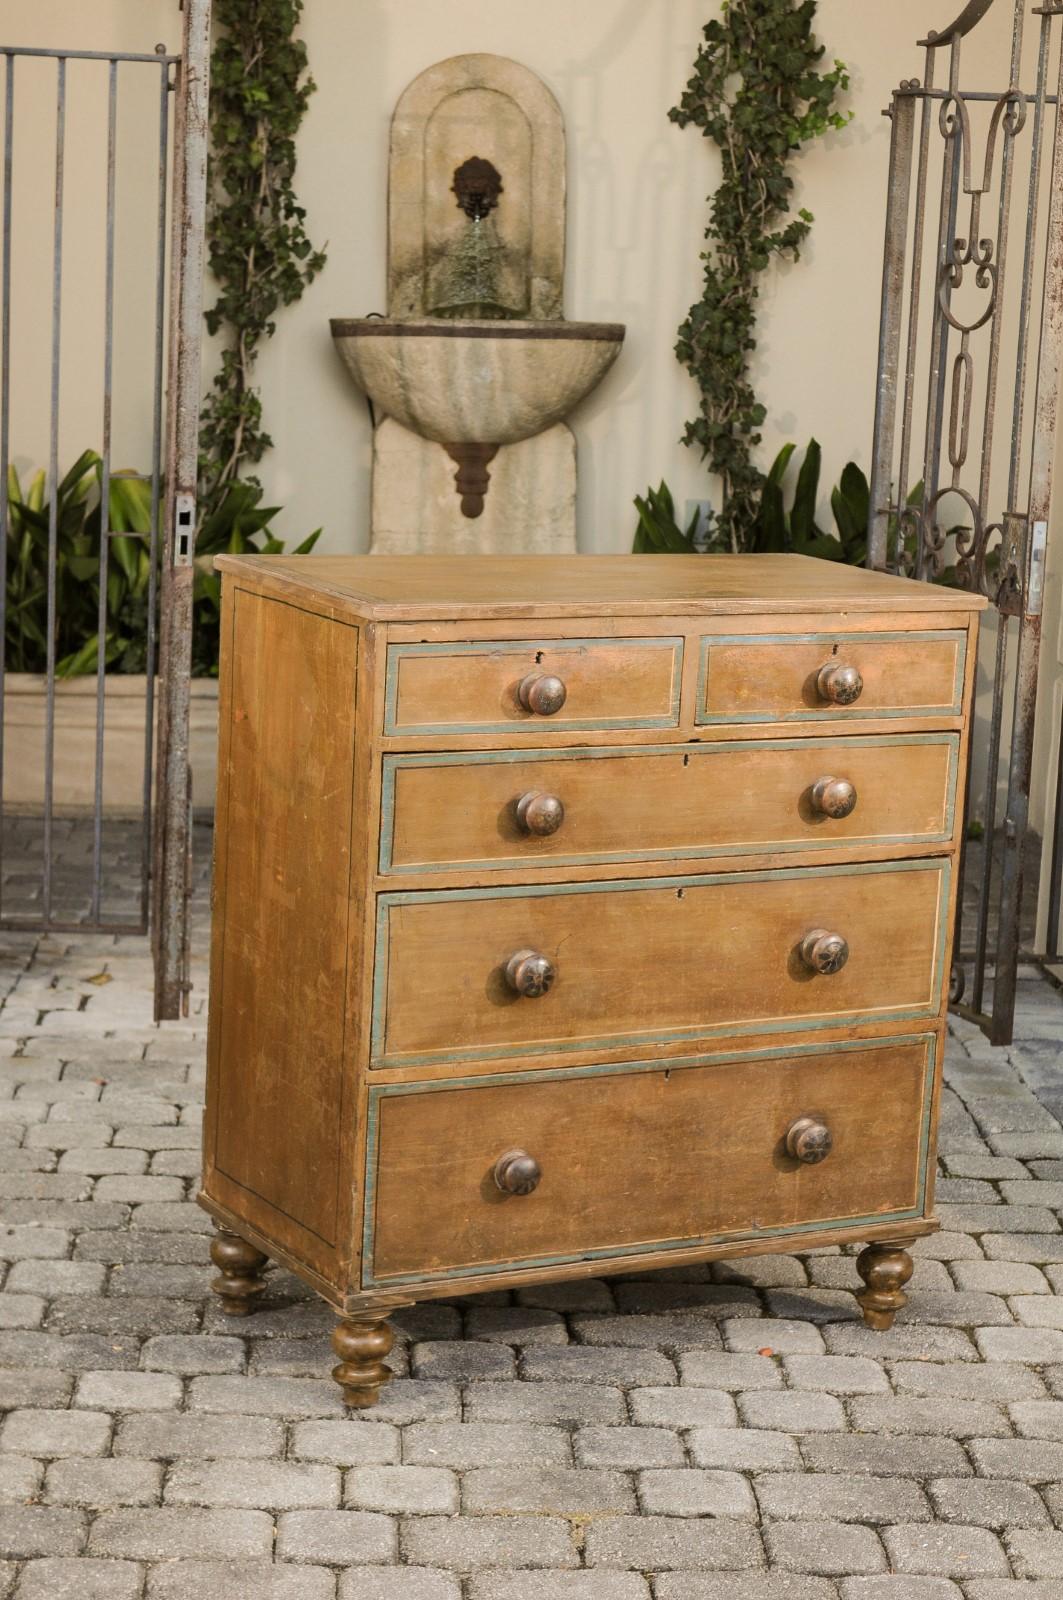 An English painted wood chest from the mid-19th century with graduated drawers and turned feet. Born in England during the mid-19th century, this chest-of-drawers charms us with its simple elegance and nicely worn patina. Featuring a rectangular top